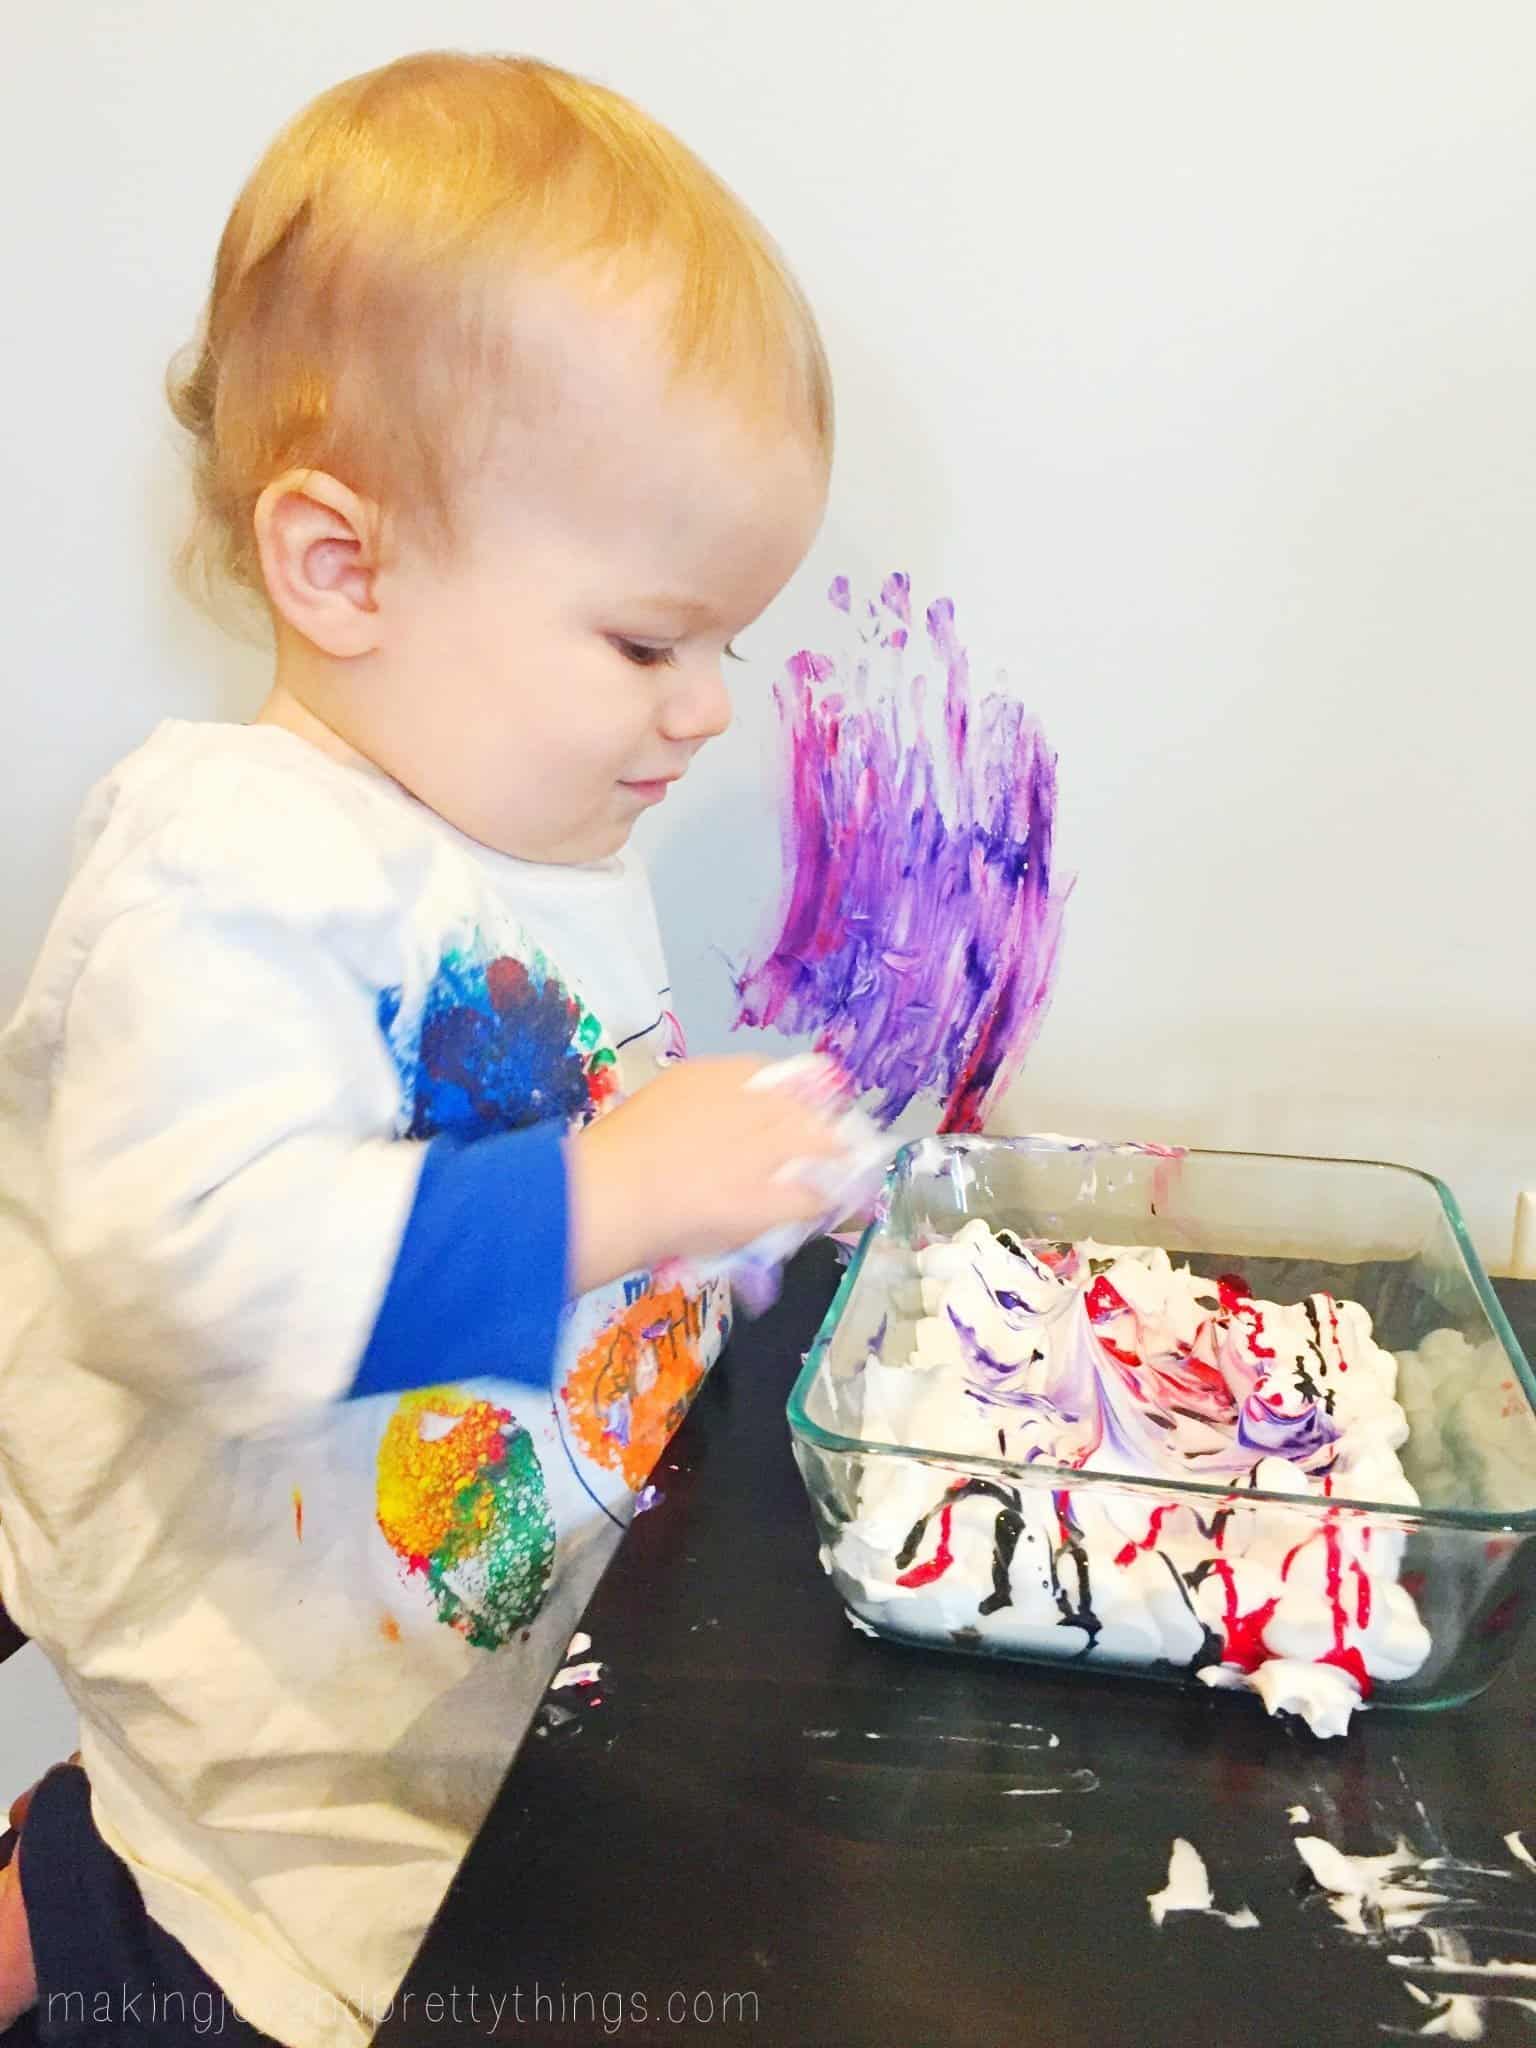 A small toddler sits at a table, a glass dish of white shaving cream mixed with food coloring on the table in front of him. There are streaks of blue and purple hand prints on the white wall next to the table.